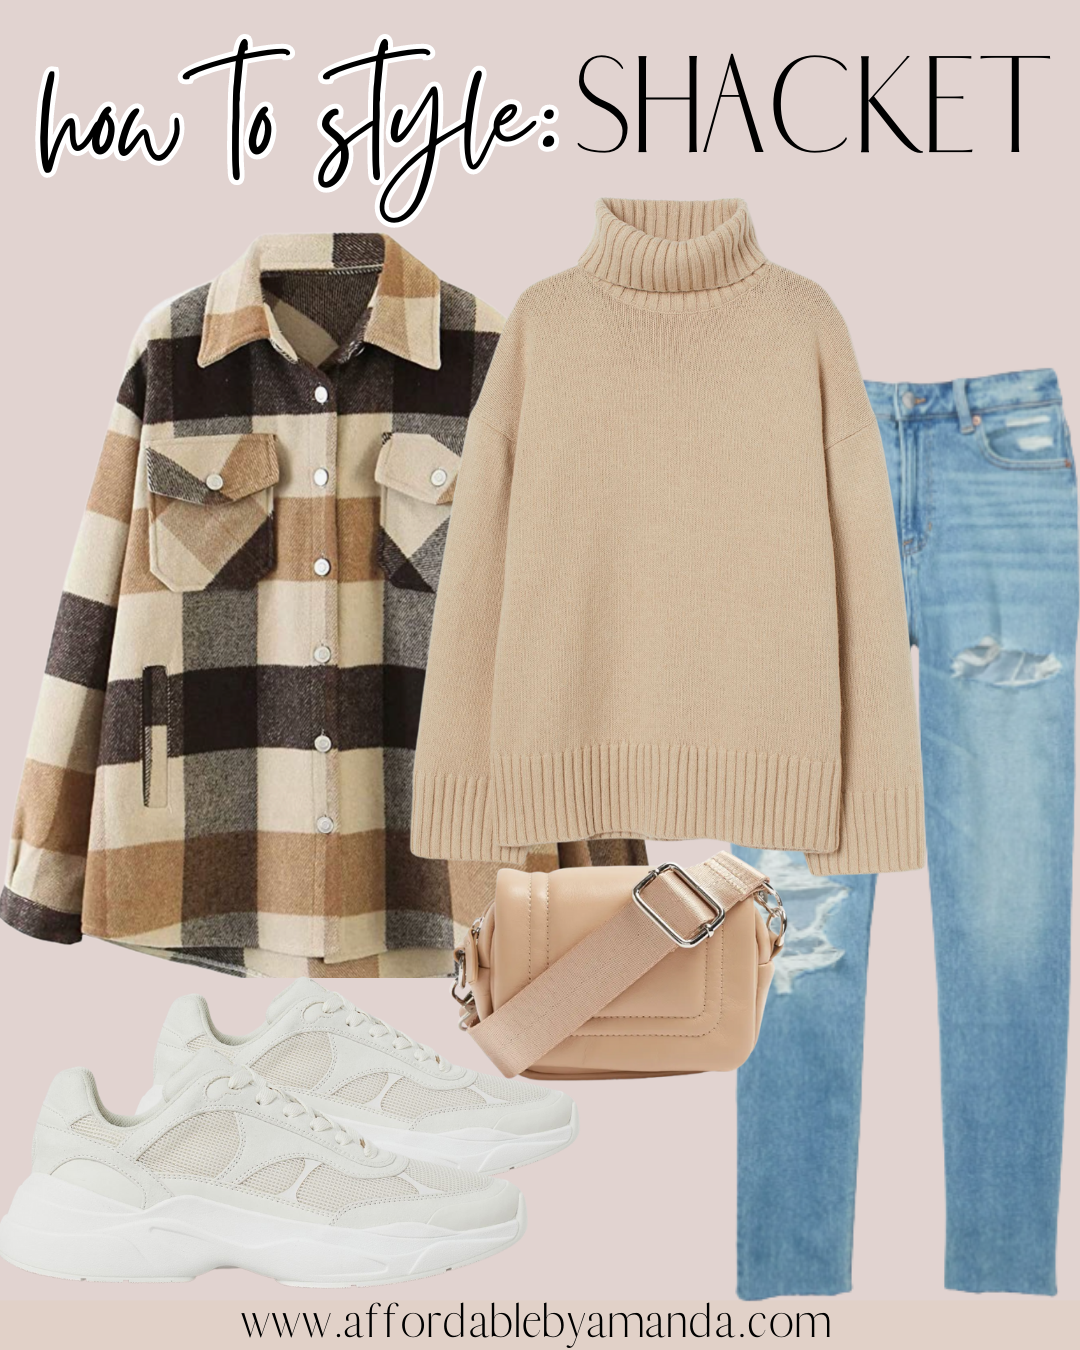 Best Shackets and How to Style Them | Affordable by Amanda